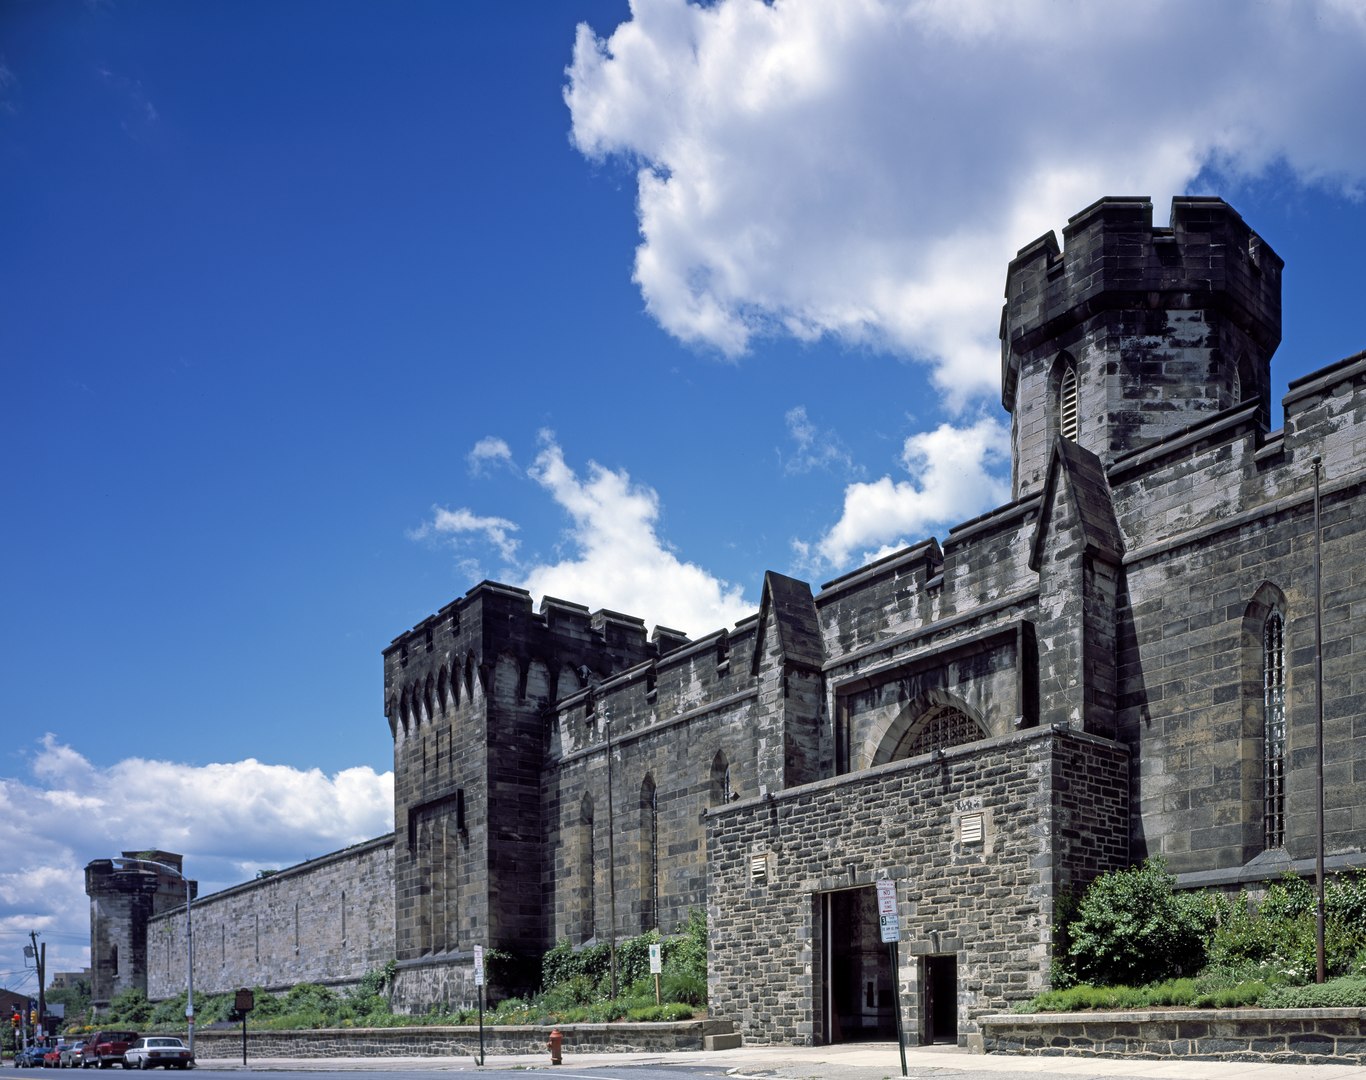 This historic prison in Philadelphia, Pennsylvania, is a popular tourist spot. But if you are not into haunted places, avoid it. The prison operated from 1829 to 1971, but today, it serves ghosts and spirits. A visit here will introduce you to shadows, unexplained laughter, and footsteps. Cellblock 12 is particularly spooky.